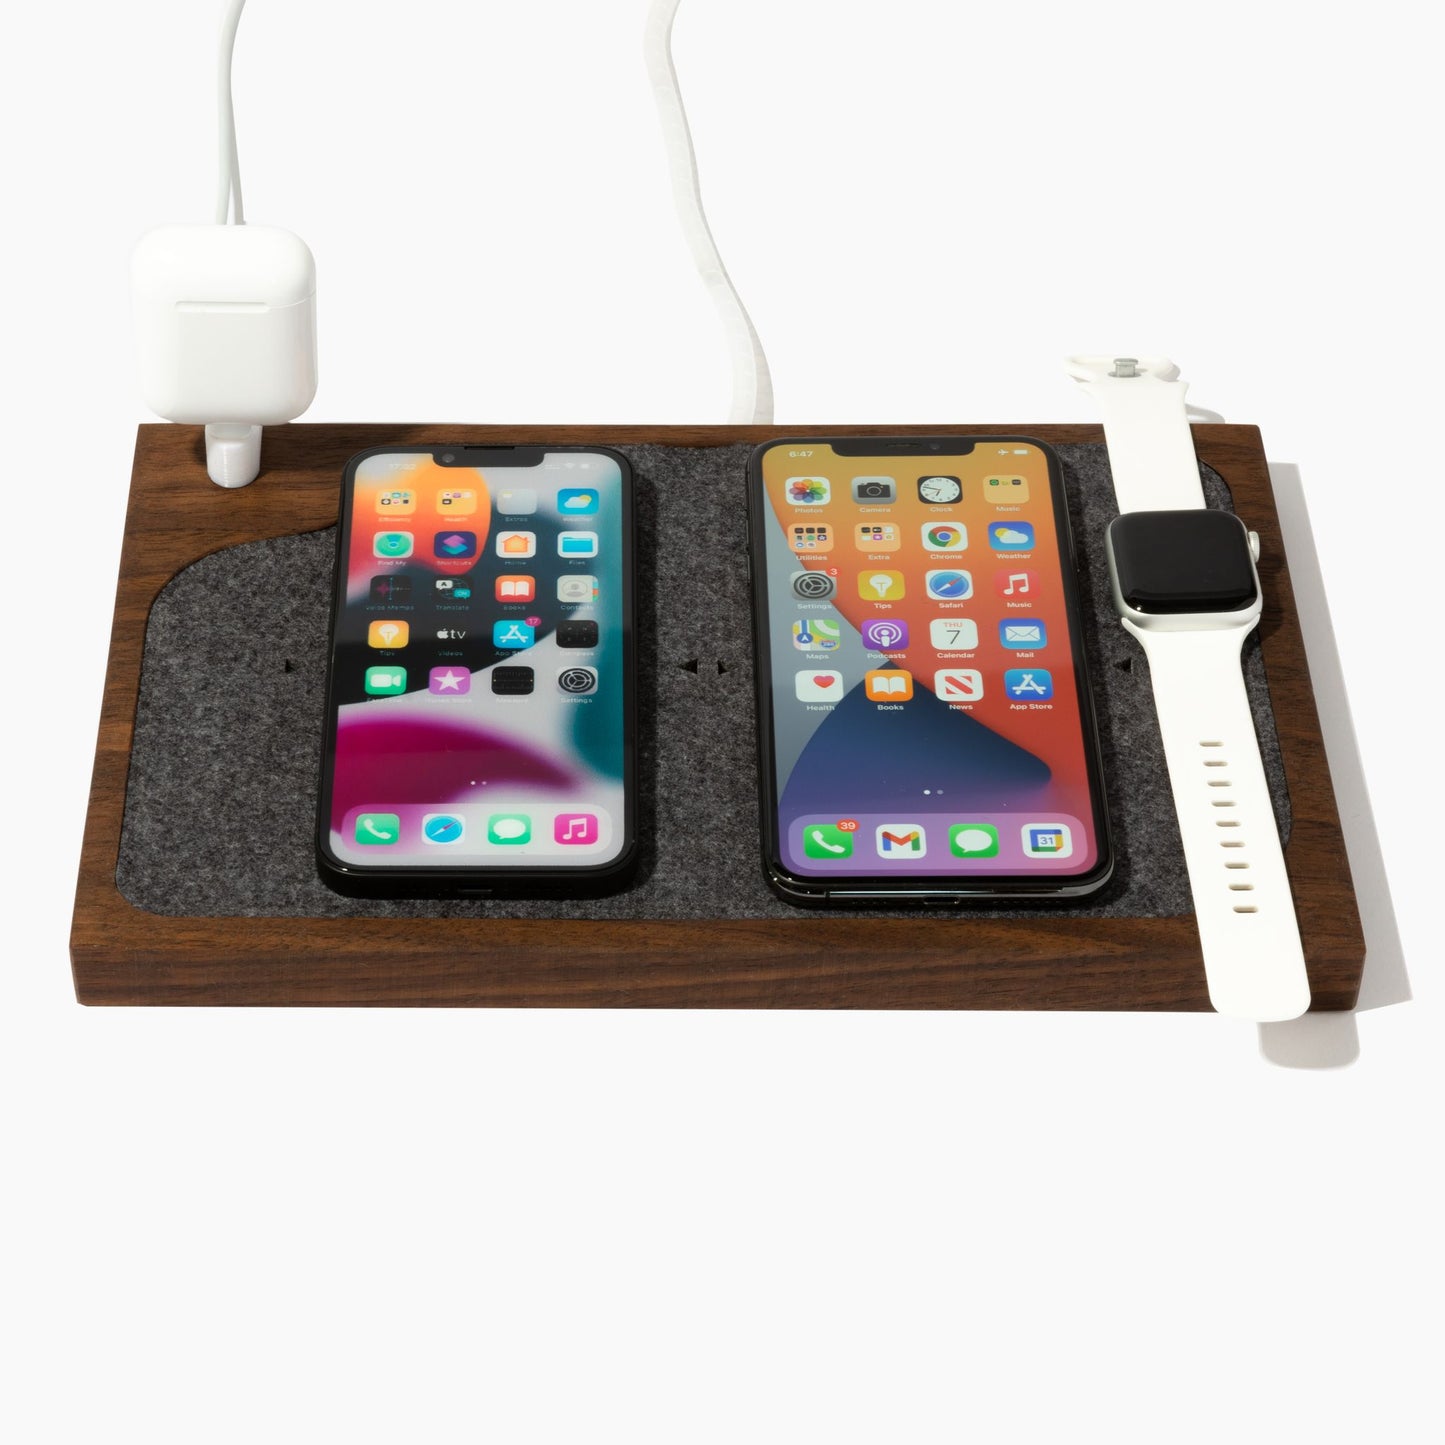 Customizable Docking Station for 1-4 Devices in Walnut